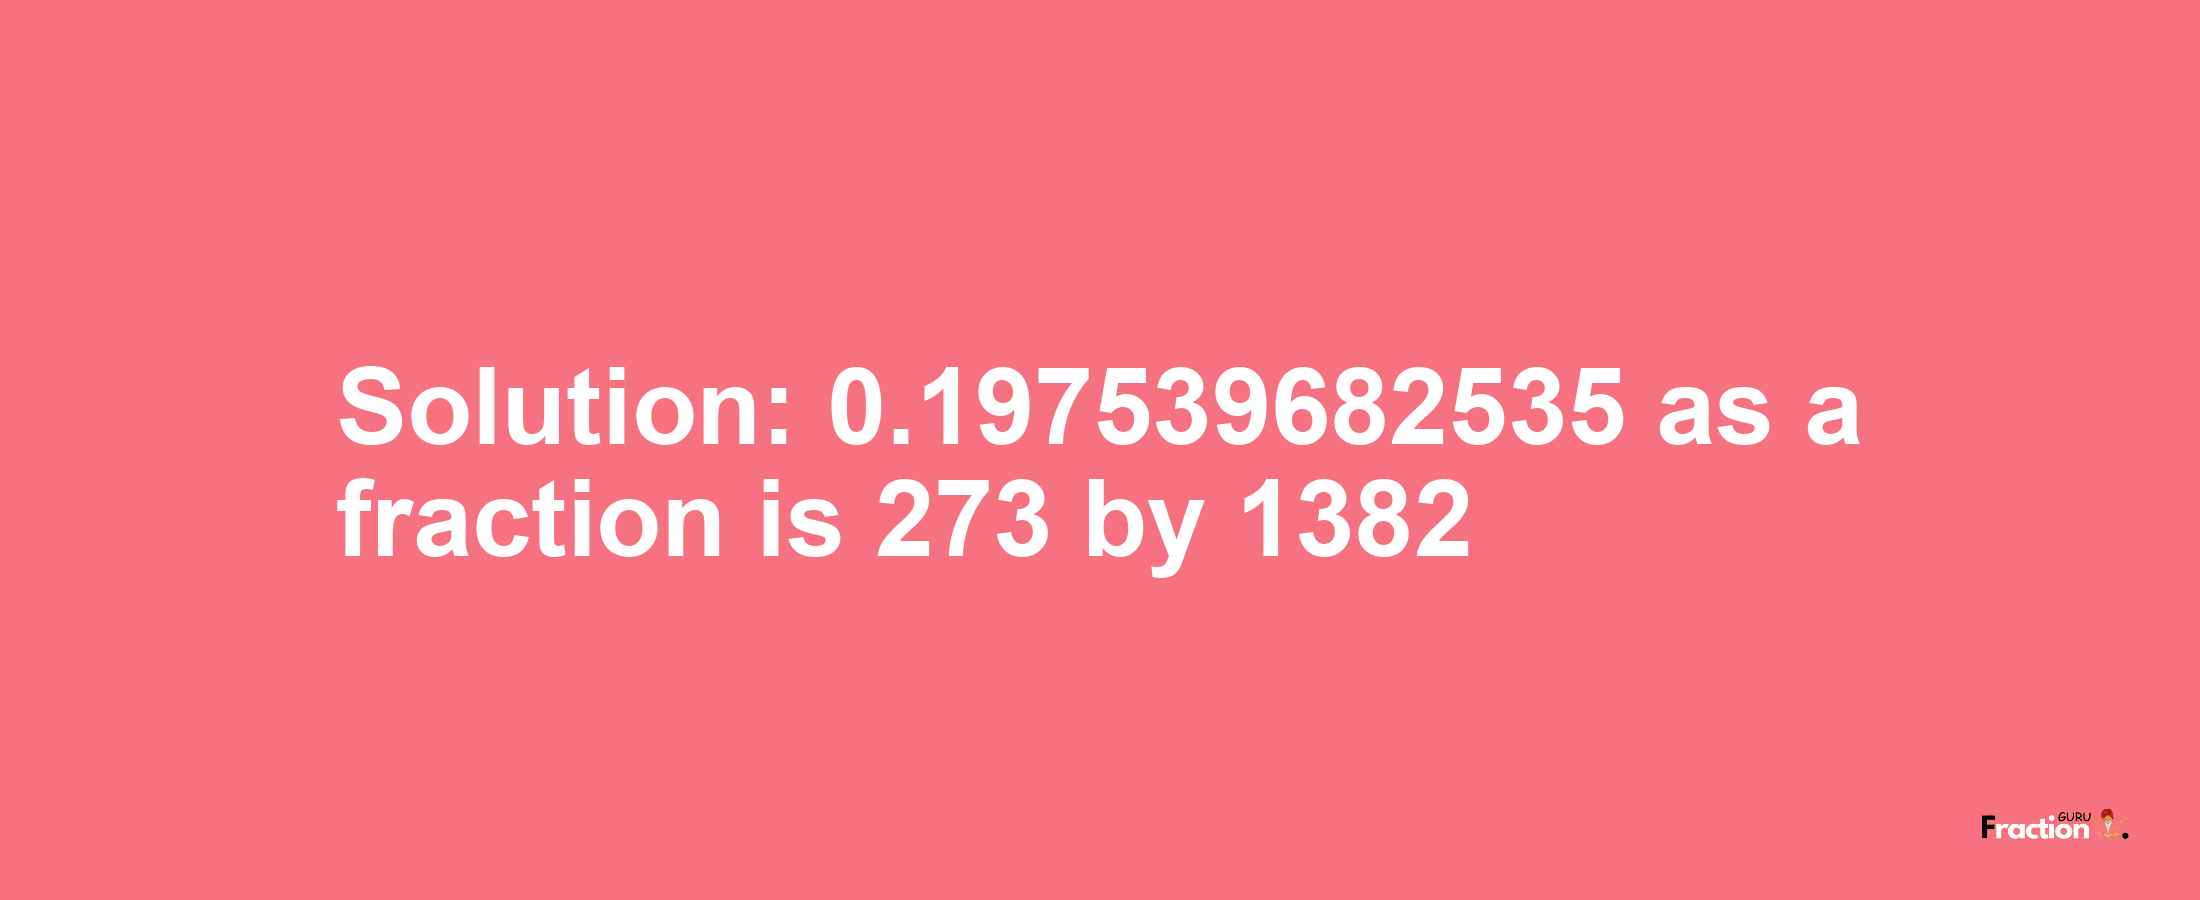 Solution:0.197539682535 as a fraction is 273/1382